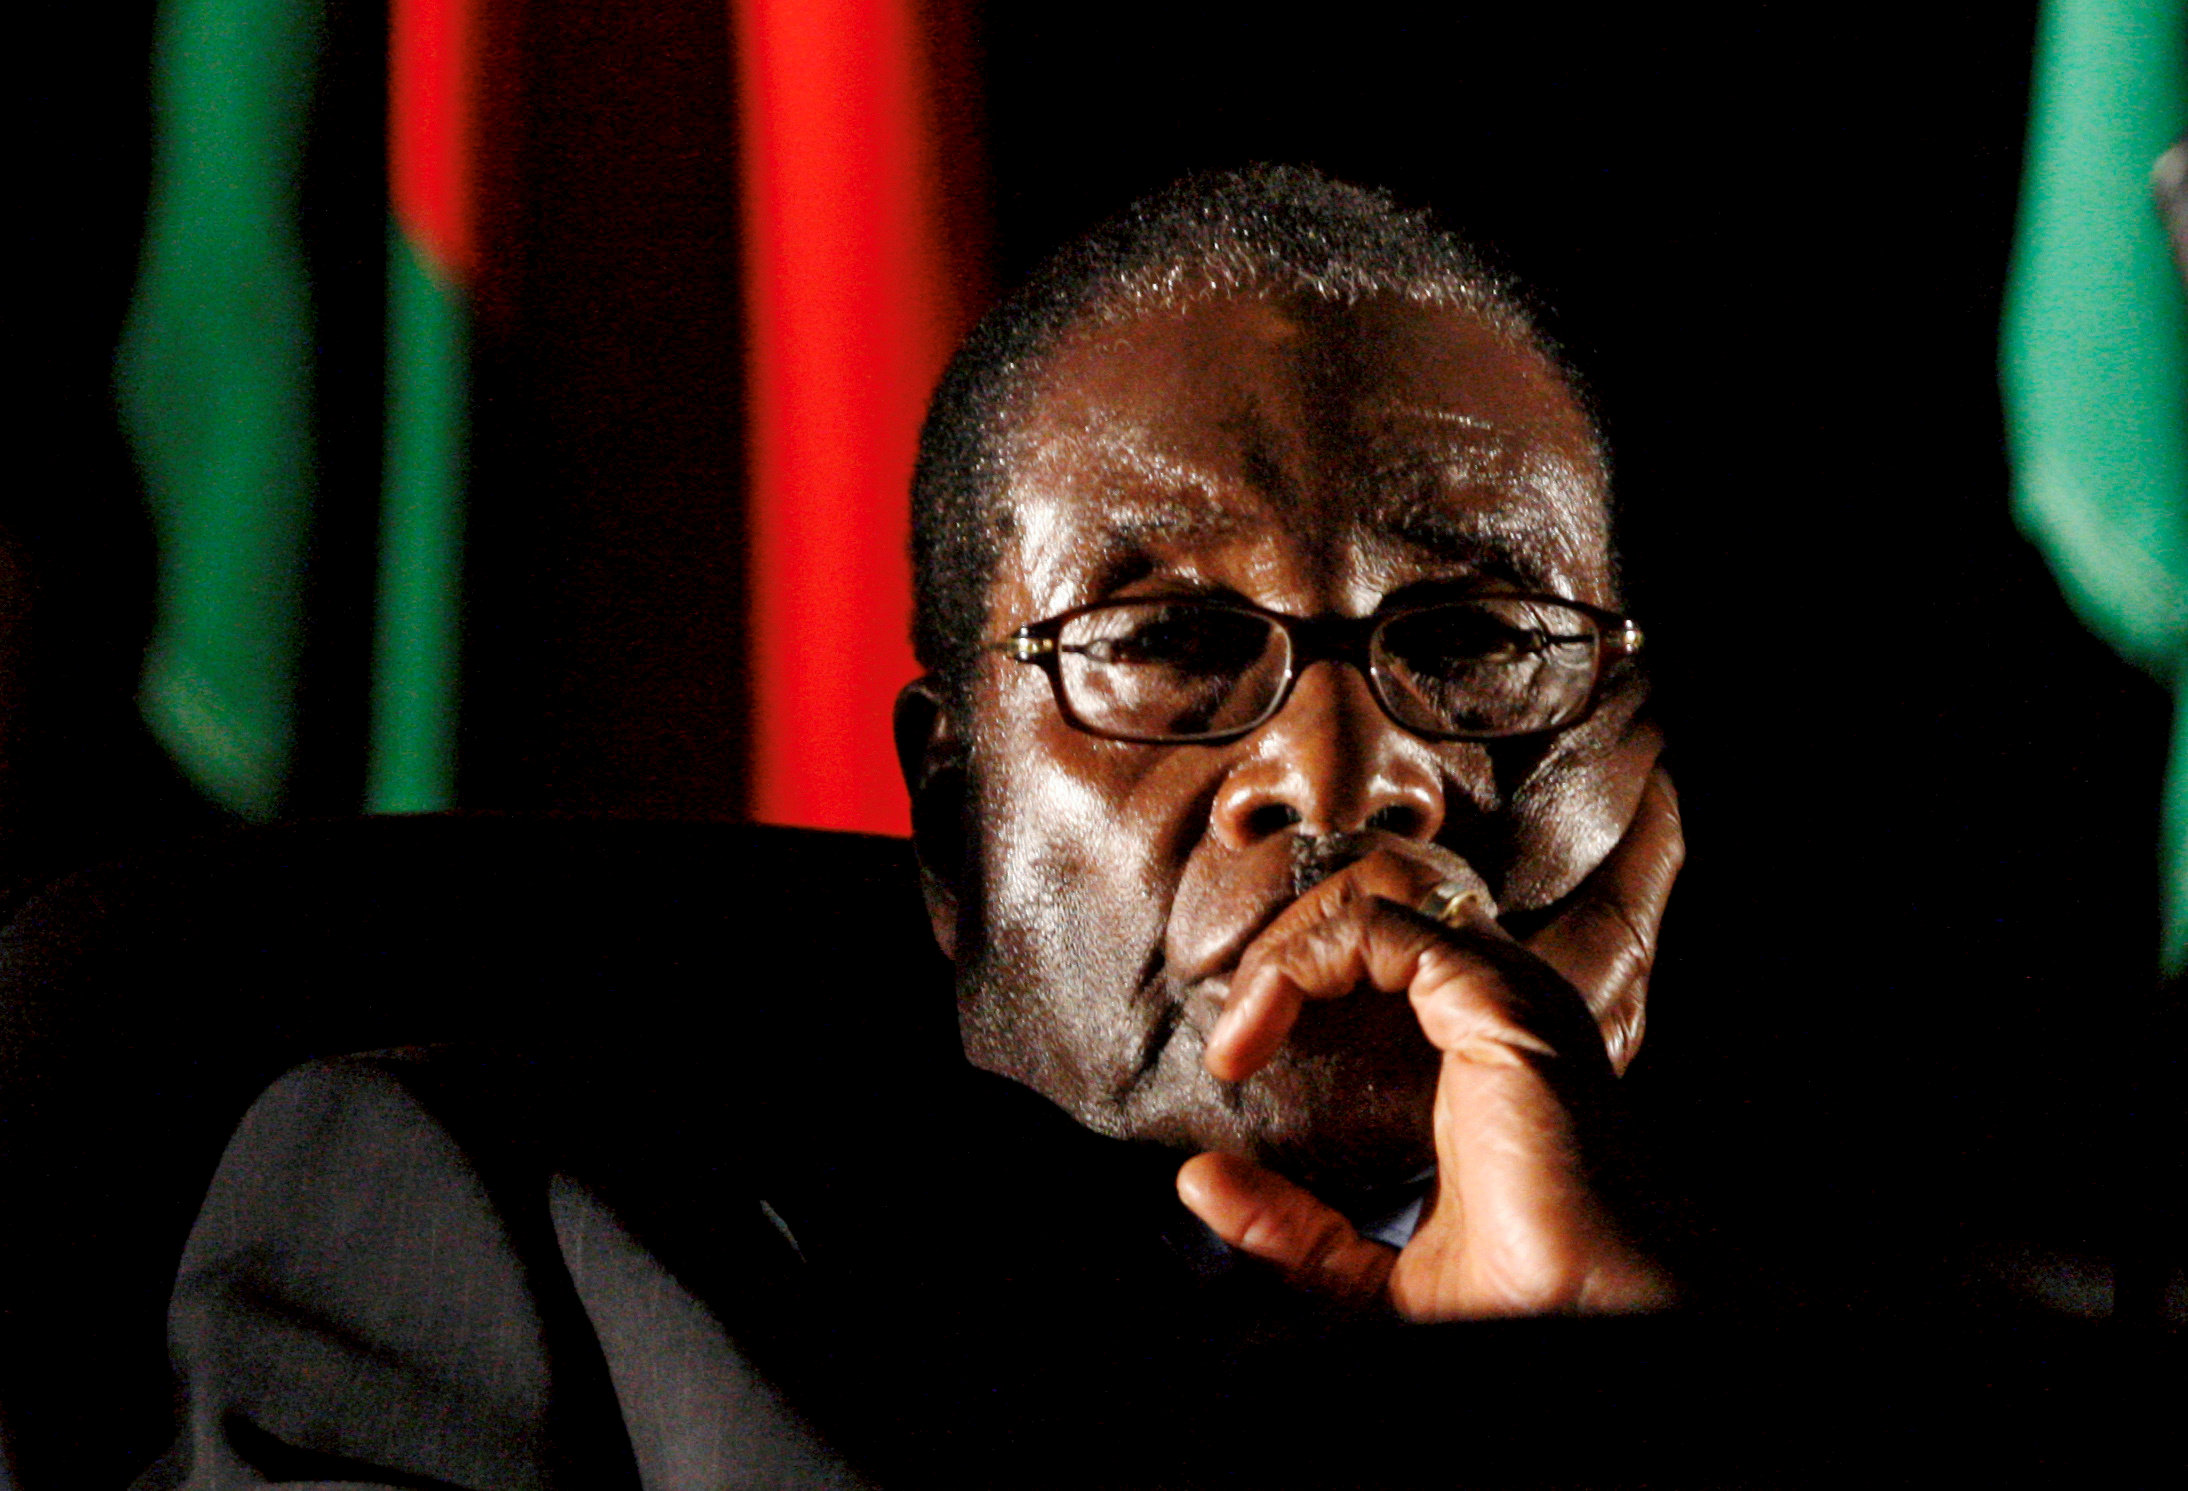 Few tears in China as old friend Mugabe ousted in Zimbabwe